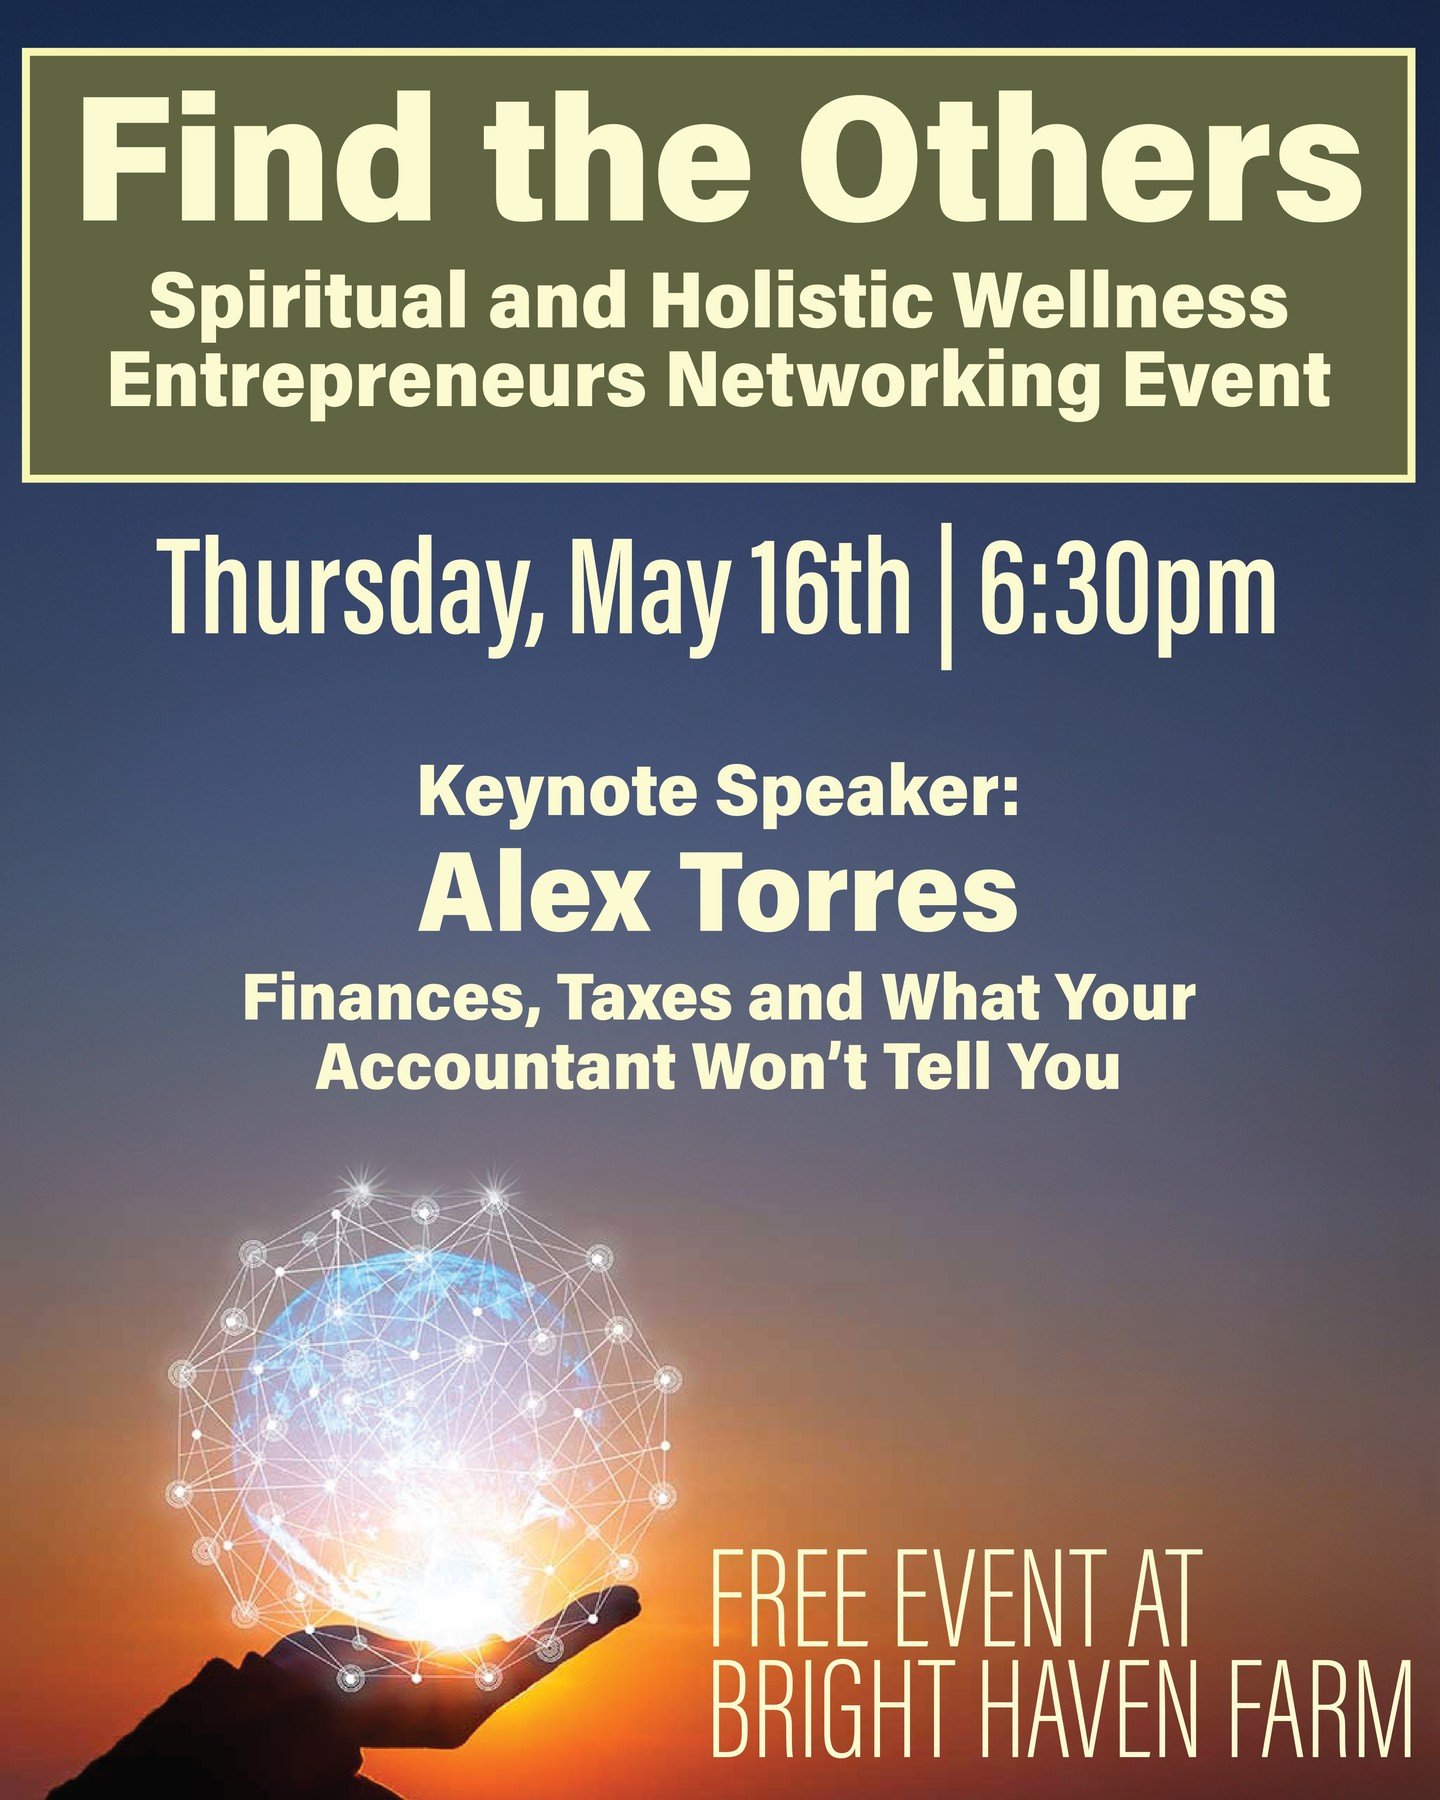 Join us at Bright Haven Farm this Thursday 5/16 for an evening of connection and community as we find ways to help build each other up.

This month&rsquo;s speaker will be Alex Torres, speaking on finances, taxes and accounting.

As a spiritual entre